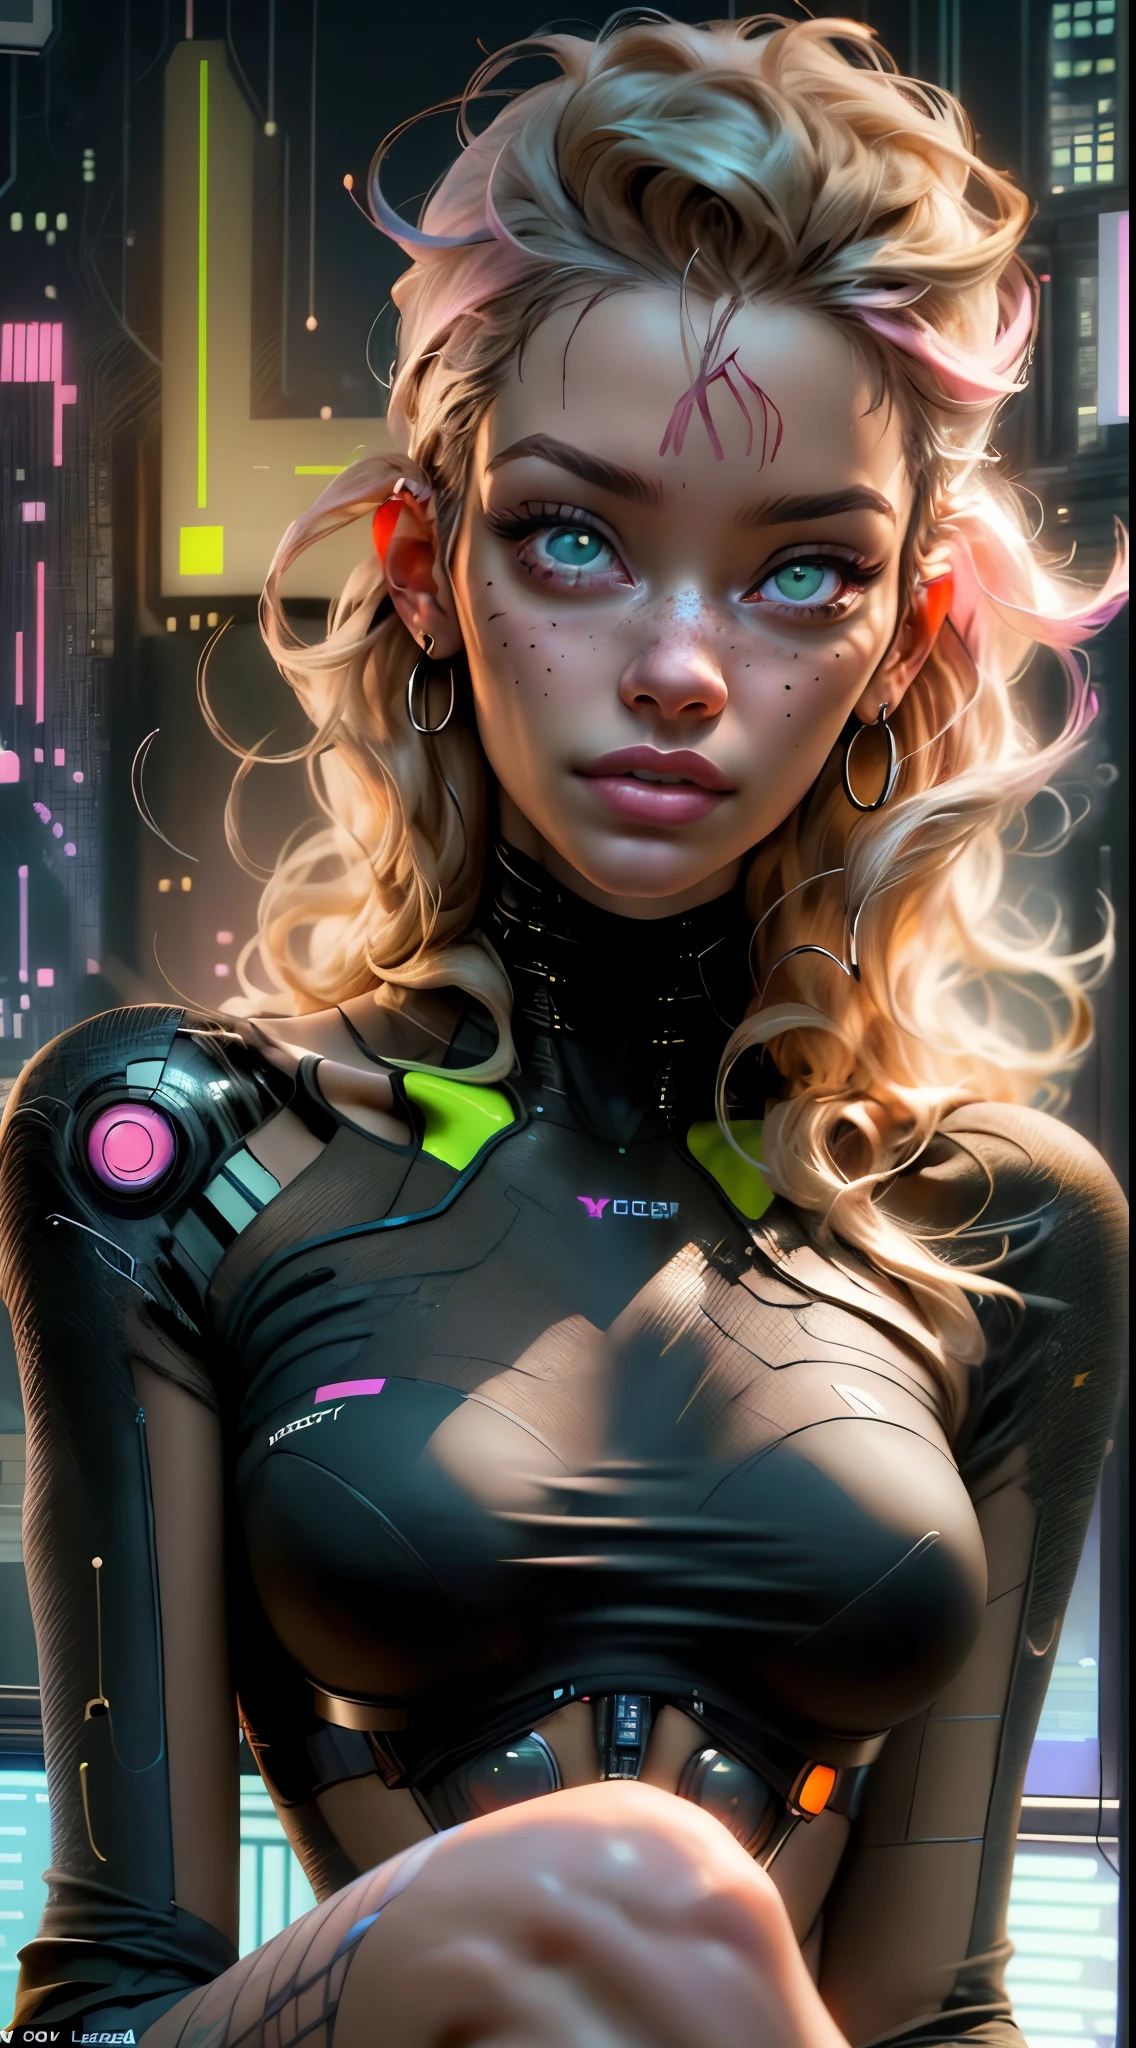 ((Long shot: 1.4, dynamic pose: 1.4)), (( 1 young woman alone:1.5)), (( beautiful, sensual and self-confident: 1.5)), (( brown eyes light and bright, cyberpunk hair:1.5)), ((ultra detailed:1.5)), sensual smile, beautiful full and shiny lips, with tattoo on arm and cheek, handsome hairstyle:1.2, cyberpunk, handsome cyberpunk, dreamer, (( beautiful and detailed hair, soft and shiny:1.3)), dark atmosphere, cyberpunk clothing, ultra-realistic 8k, cyberpunk 20 years. a model , the portrait, highly detailed 32k digital art, beautiful digital artwork, Cyborg Cyberpunk. ((colors, cyan, greens, pink, brown: 1.2)), 8k realistic digital art, soft neon lighting on the face and body, ((highly detailed: 1.4), ((masterpiece)), (hyper detailed and beautiful: 1.3), (Photorealistic: 1.4)